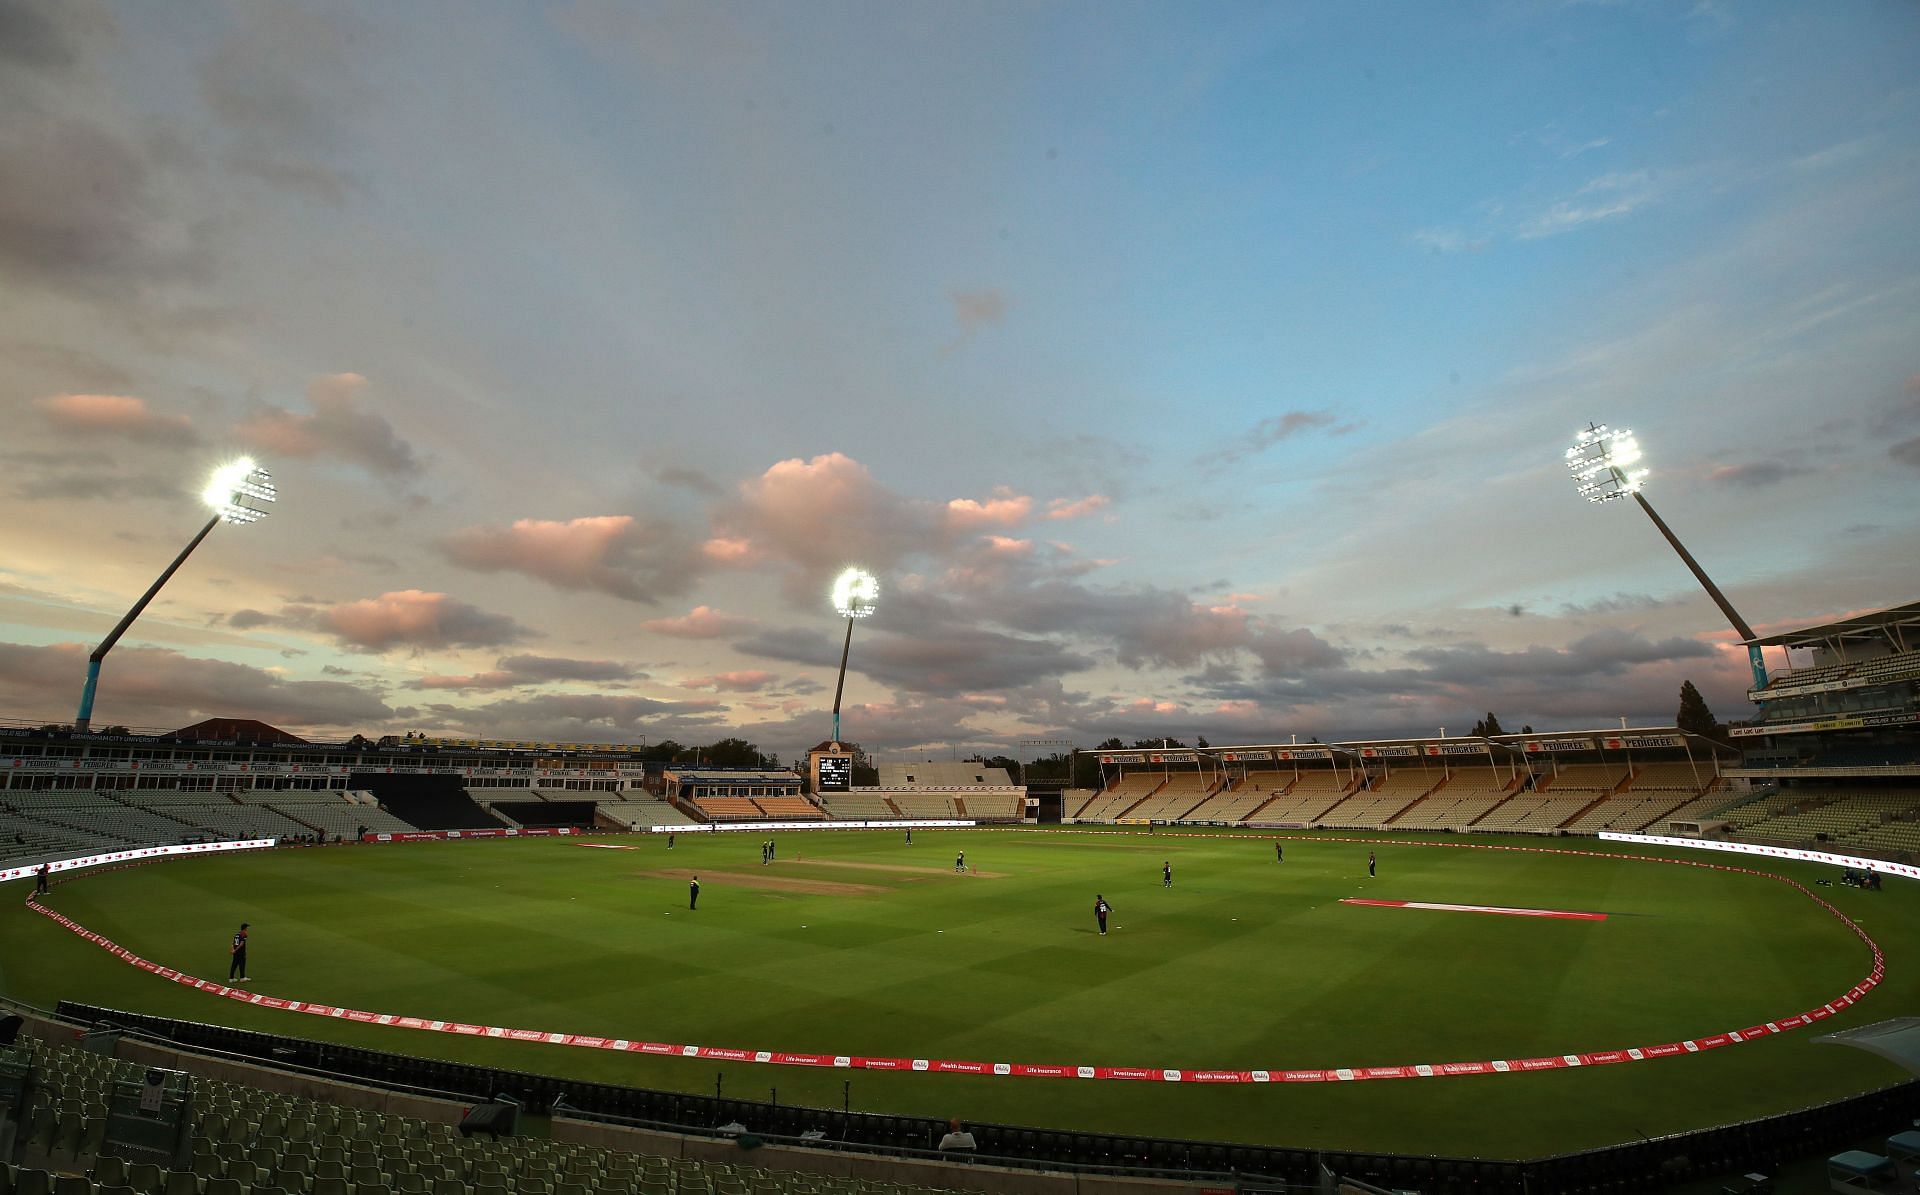 A view of the Edgbaston Cricket ground. (PC: Getty Images)